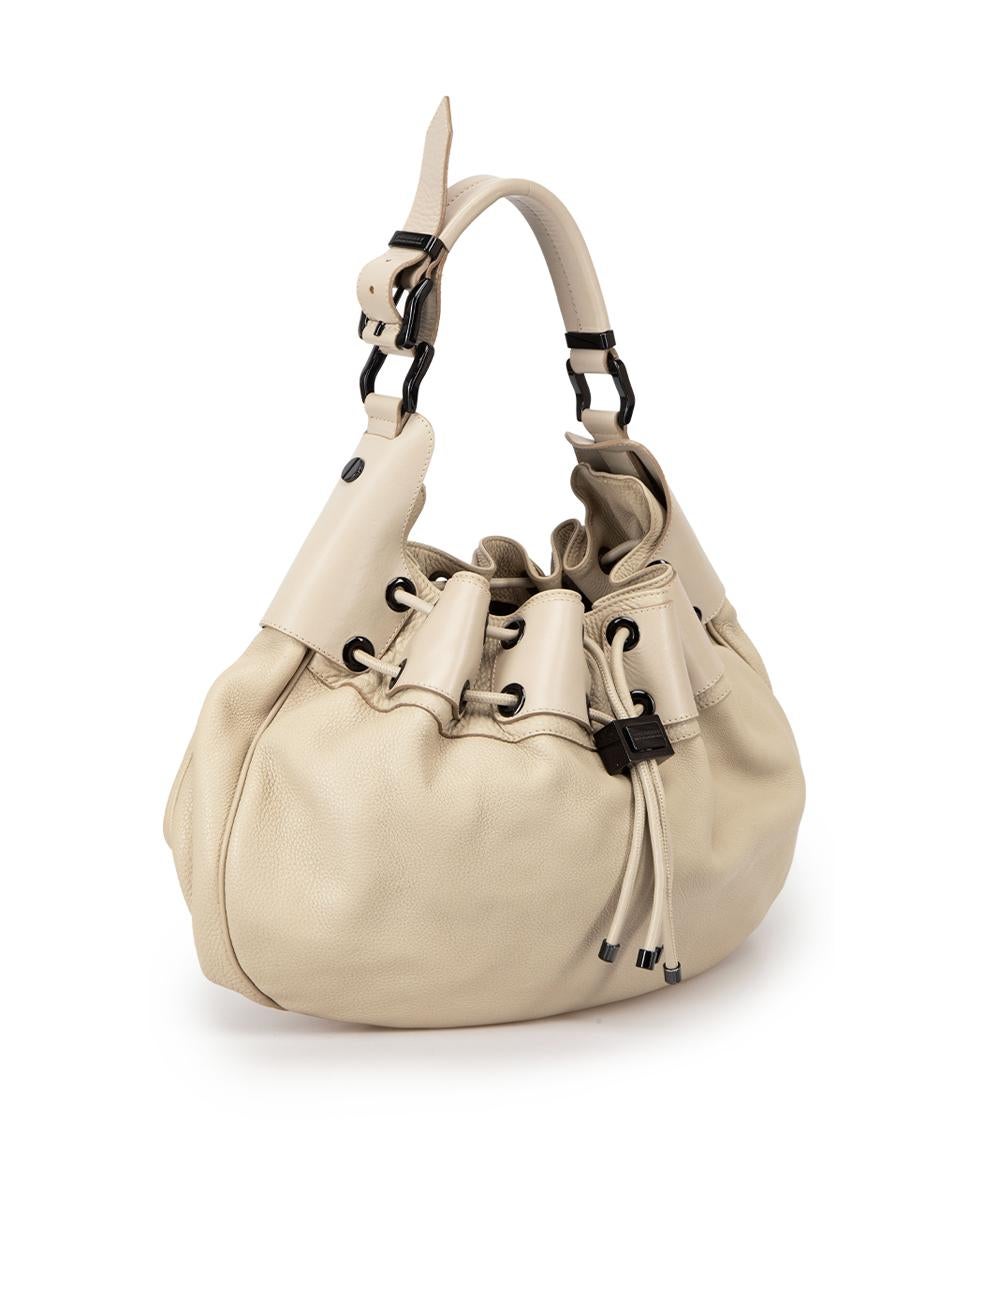 CONDITION is Very good. Minimal wear to bag is evident. Minimal wear to the leather with small orange markings at the centre-front, left-side of top handle and centre-front drawstring on this used Burberry designer resale